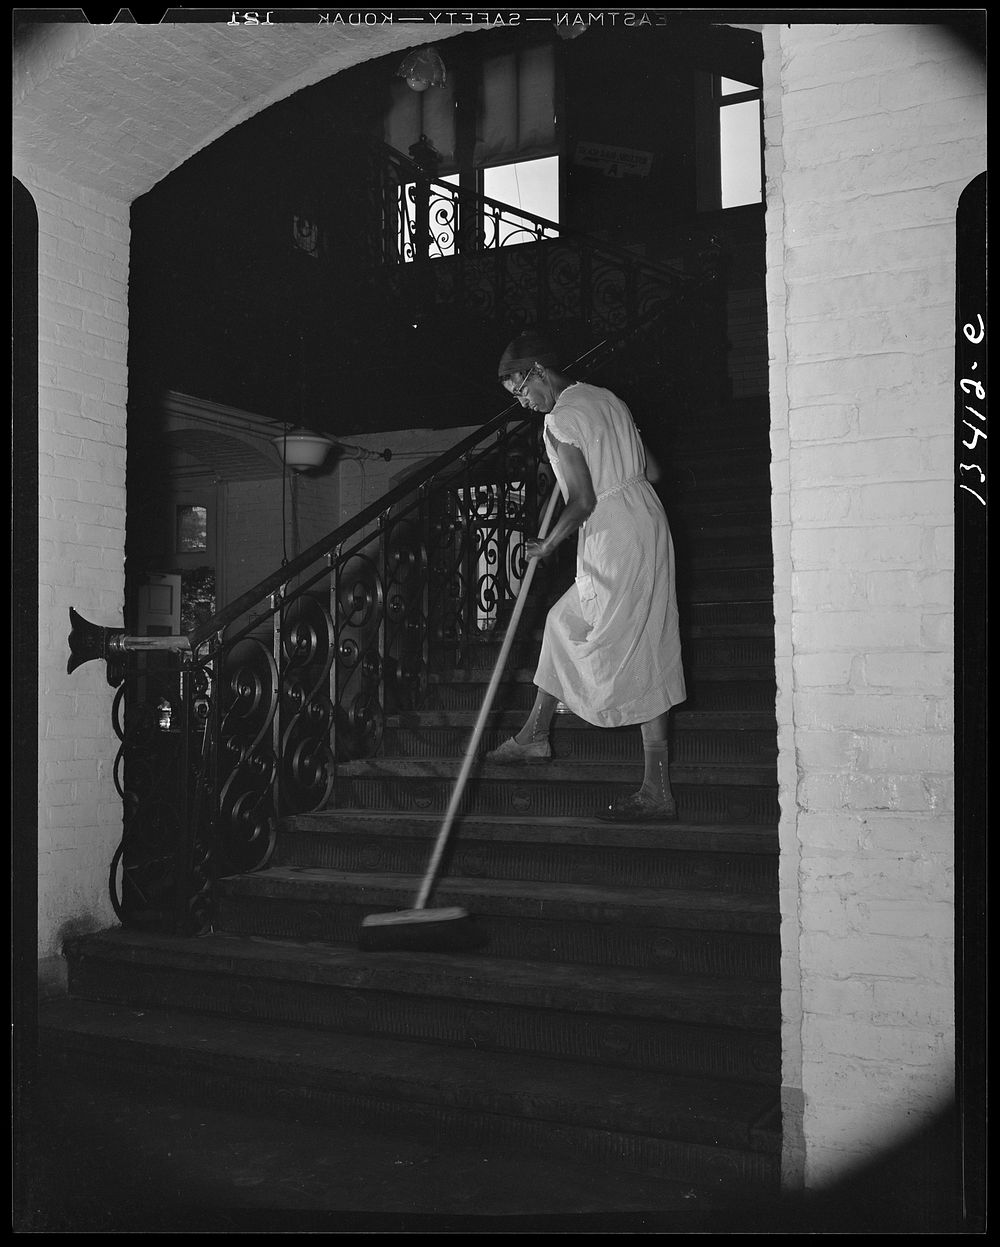 Washington, D.C. Government charwoman cleaning after regular working hours. Sourced from the Library of Congress.